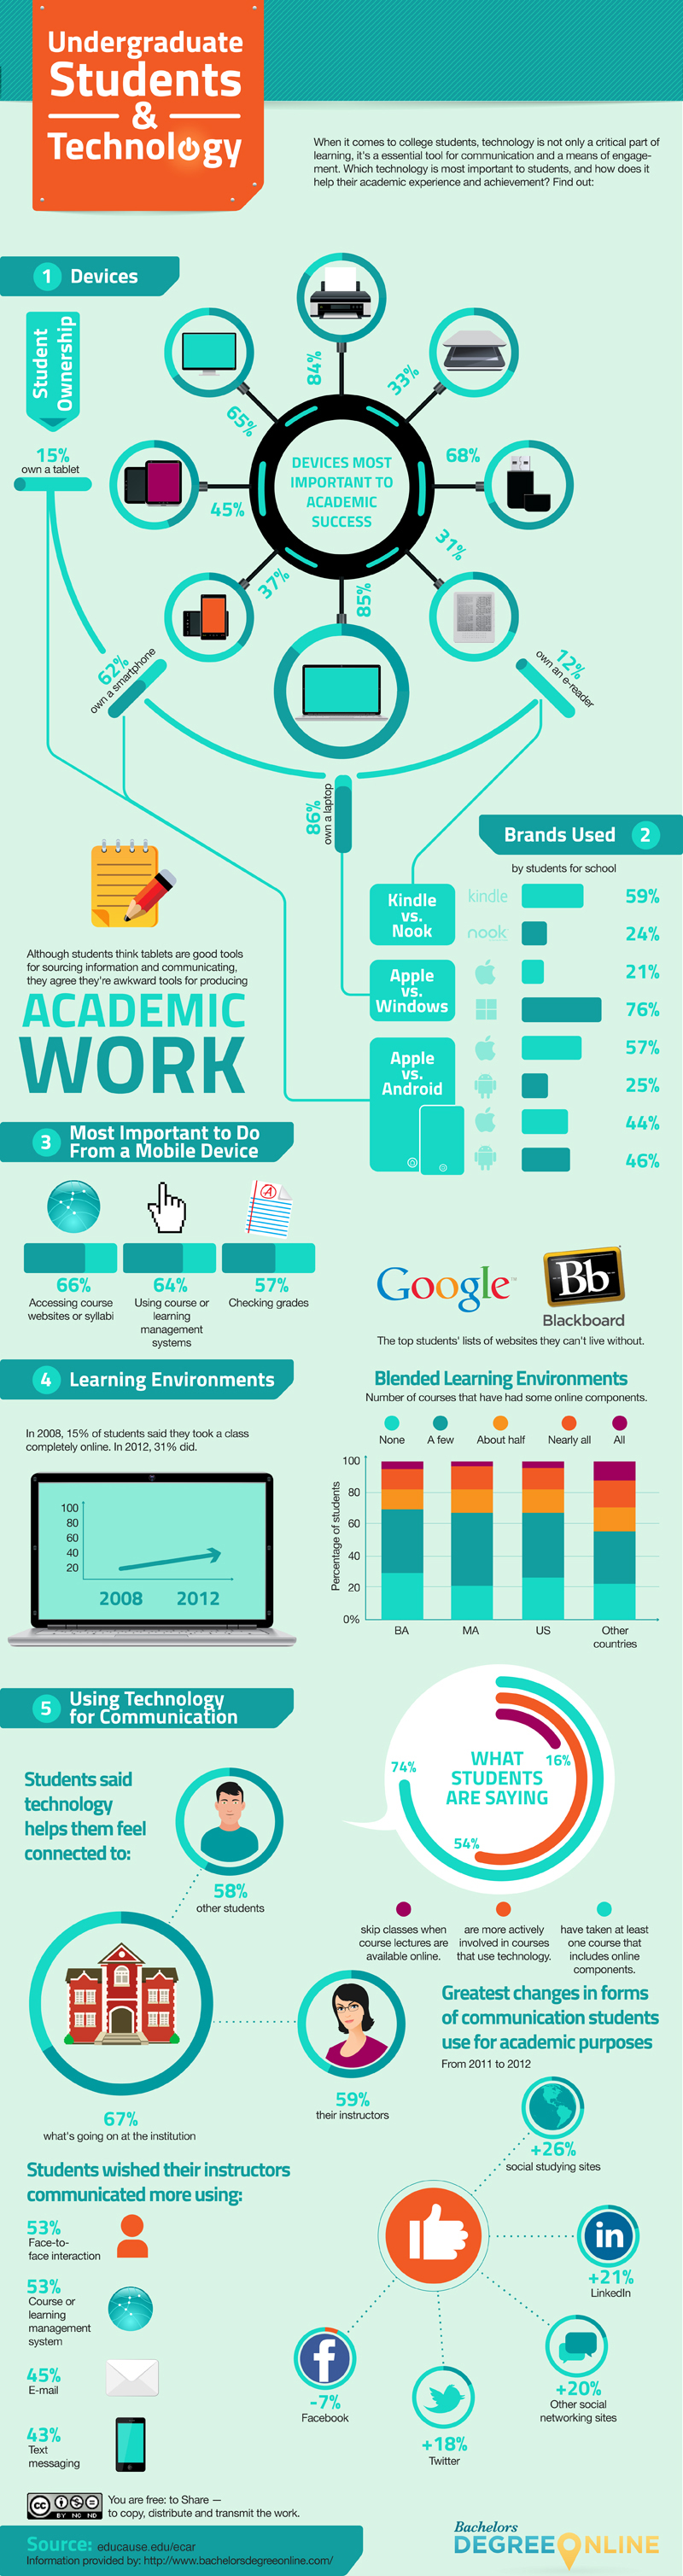 Undergraduate Students and Technology infographic